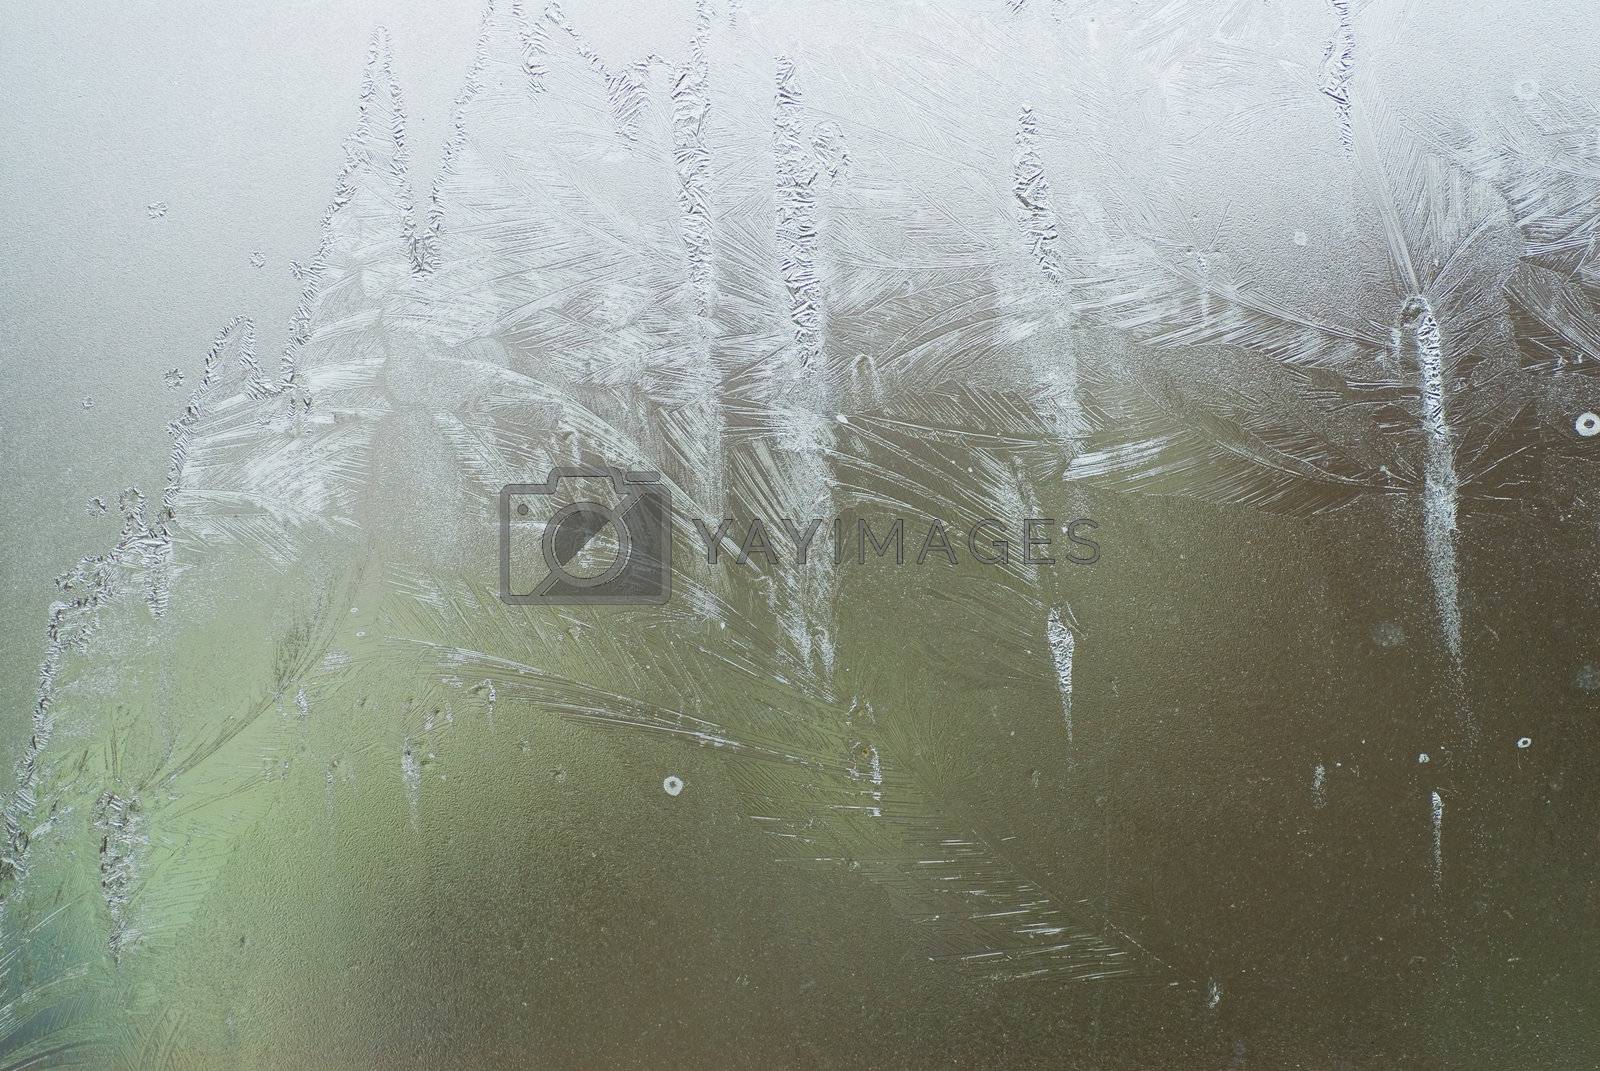 Royalty free image of ice on a window by artjazz